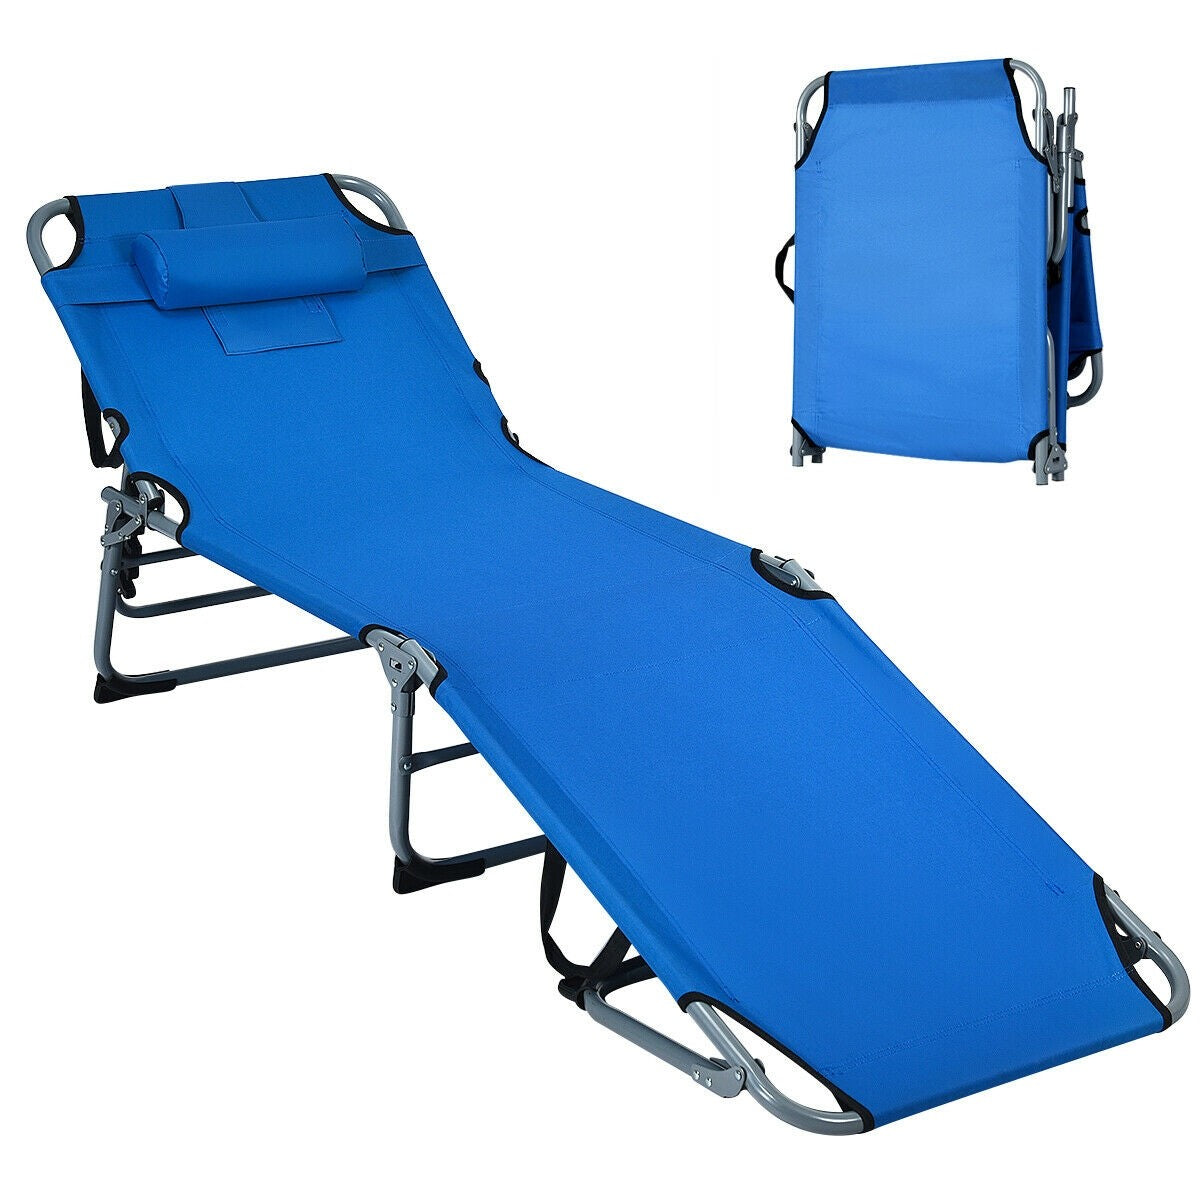 Outdoor Folding Chaise Lounge Chair, Adjustable Camping Recliner Chair